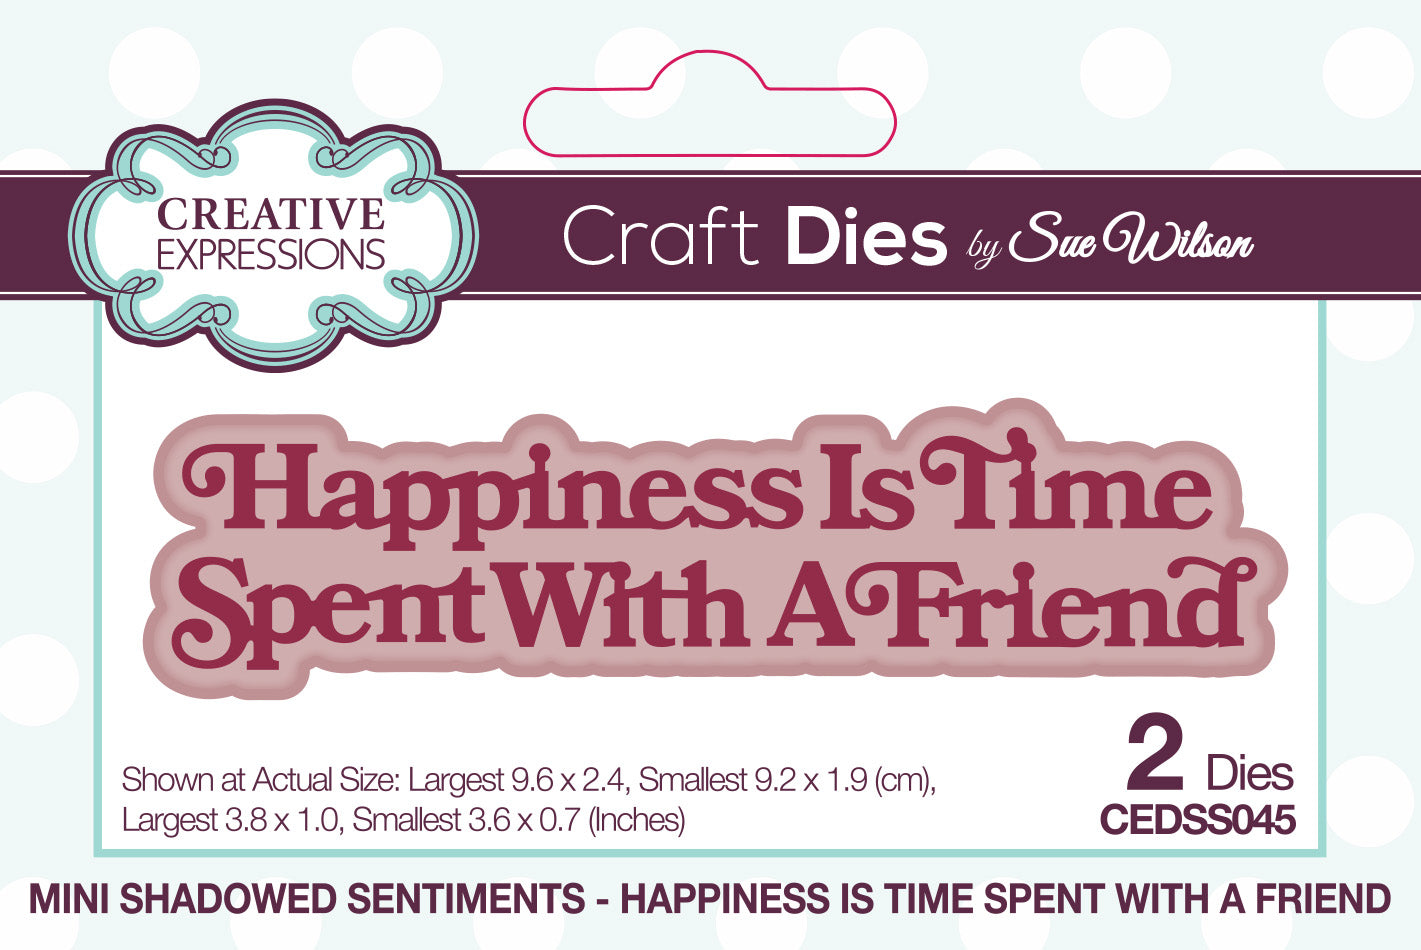 Creative Expressions Sue Wilson Mini Shadowed Sentiments Happiness Is Time Spent With A Friend Craft Die